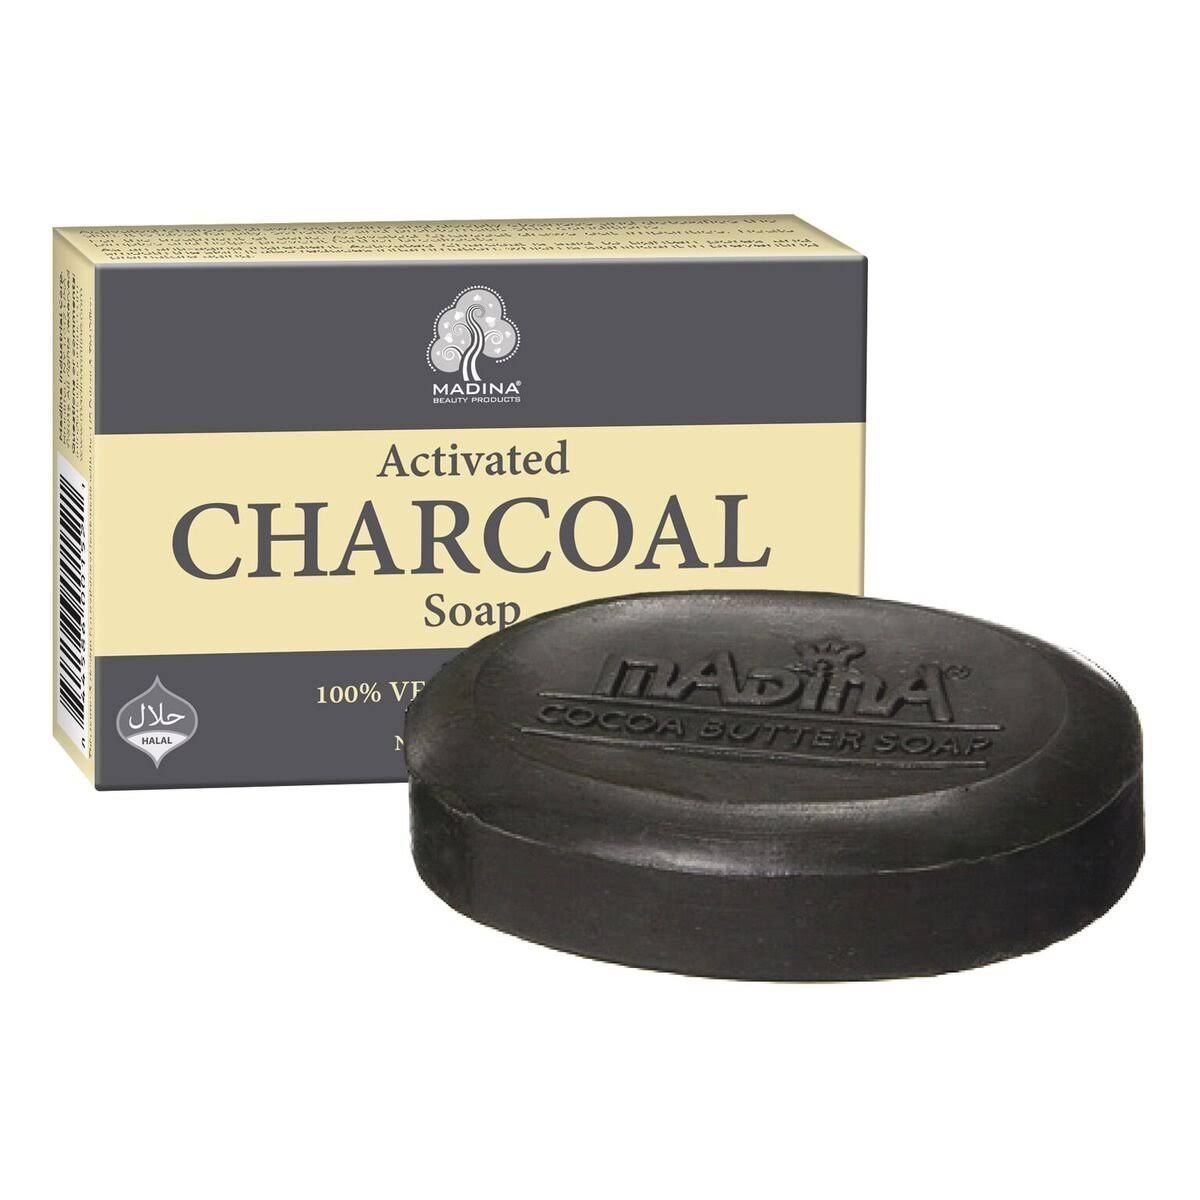 Madina Activated Charcoal Soap